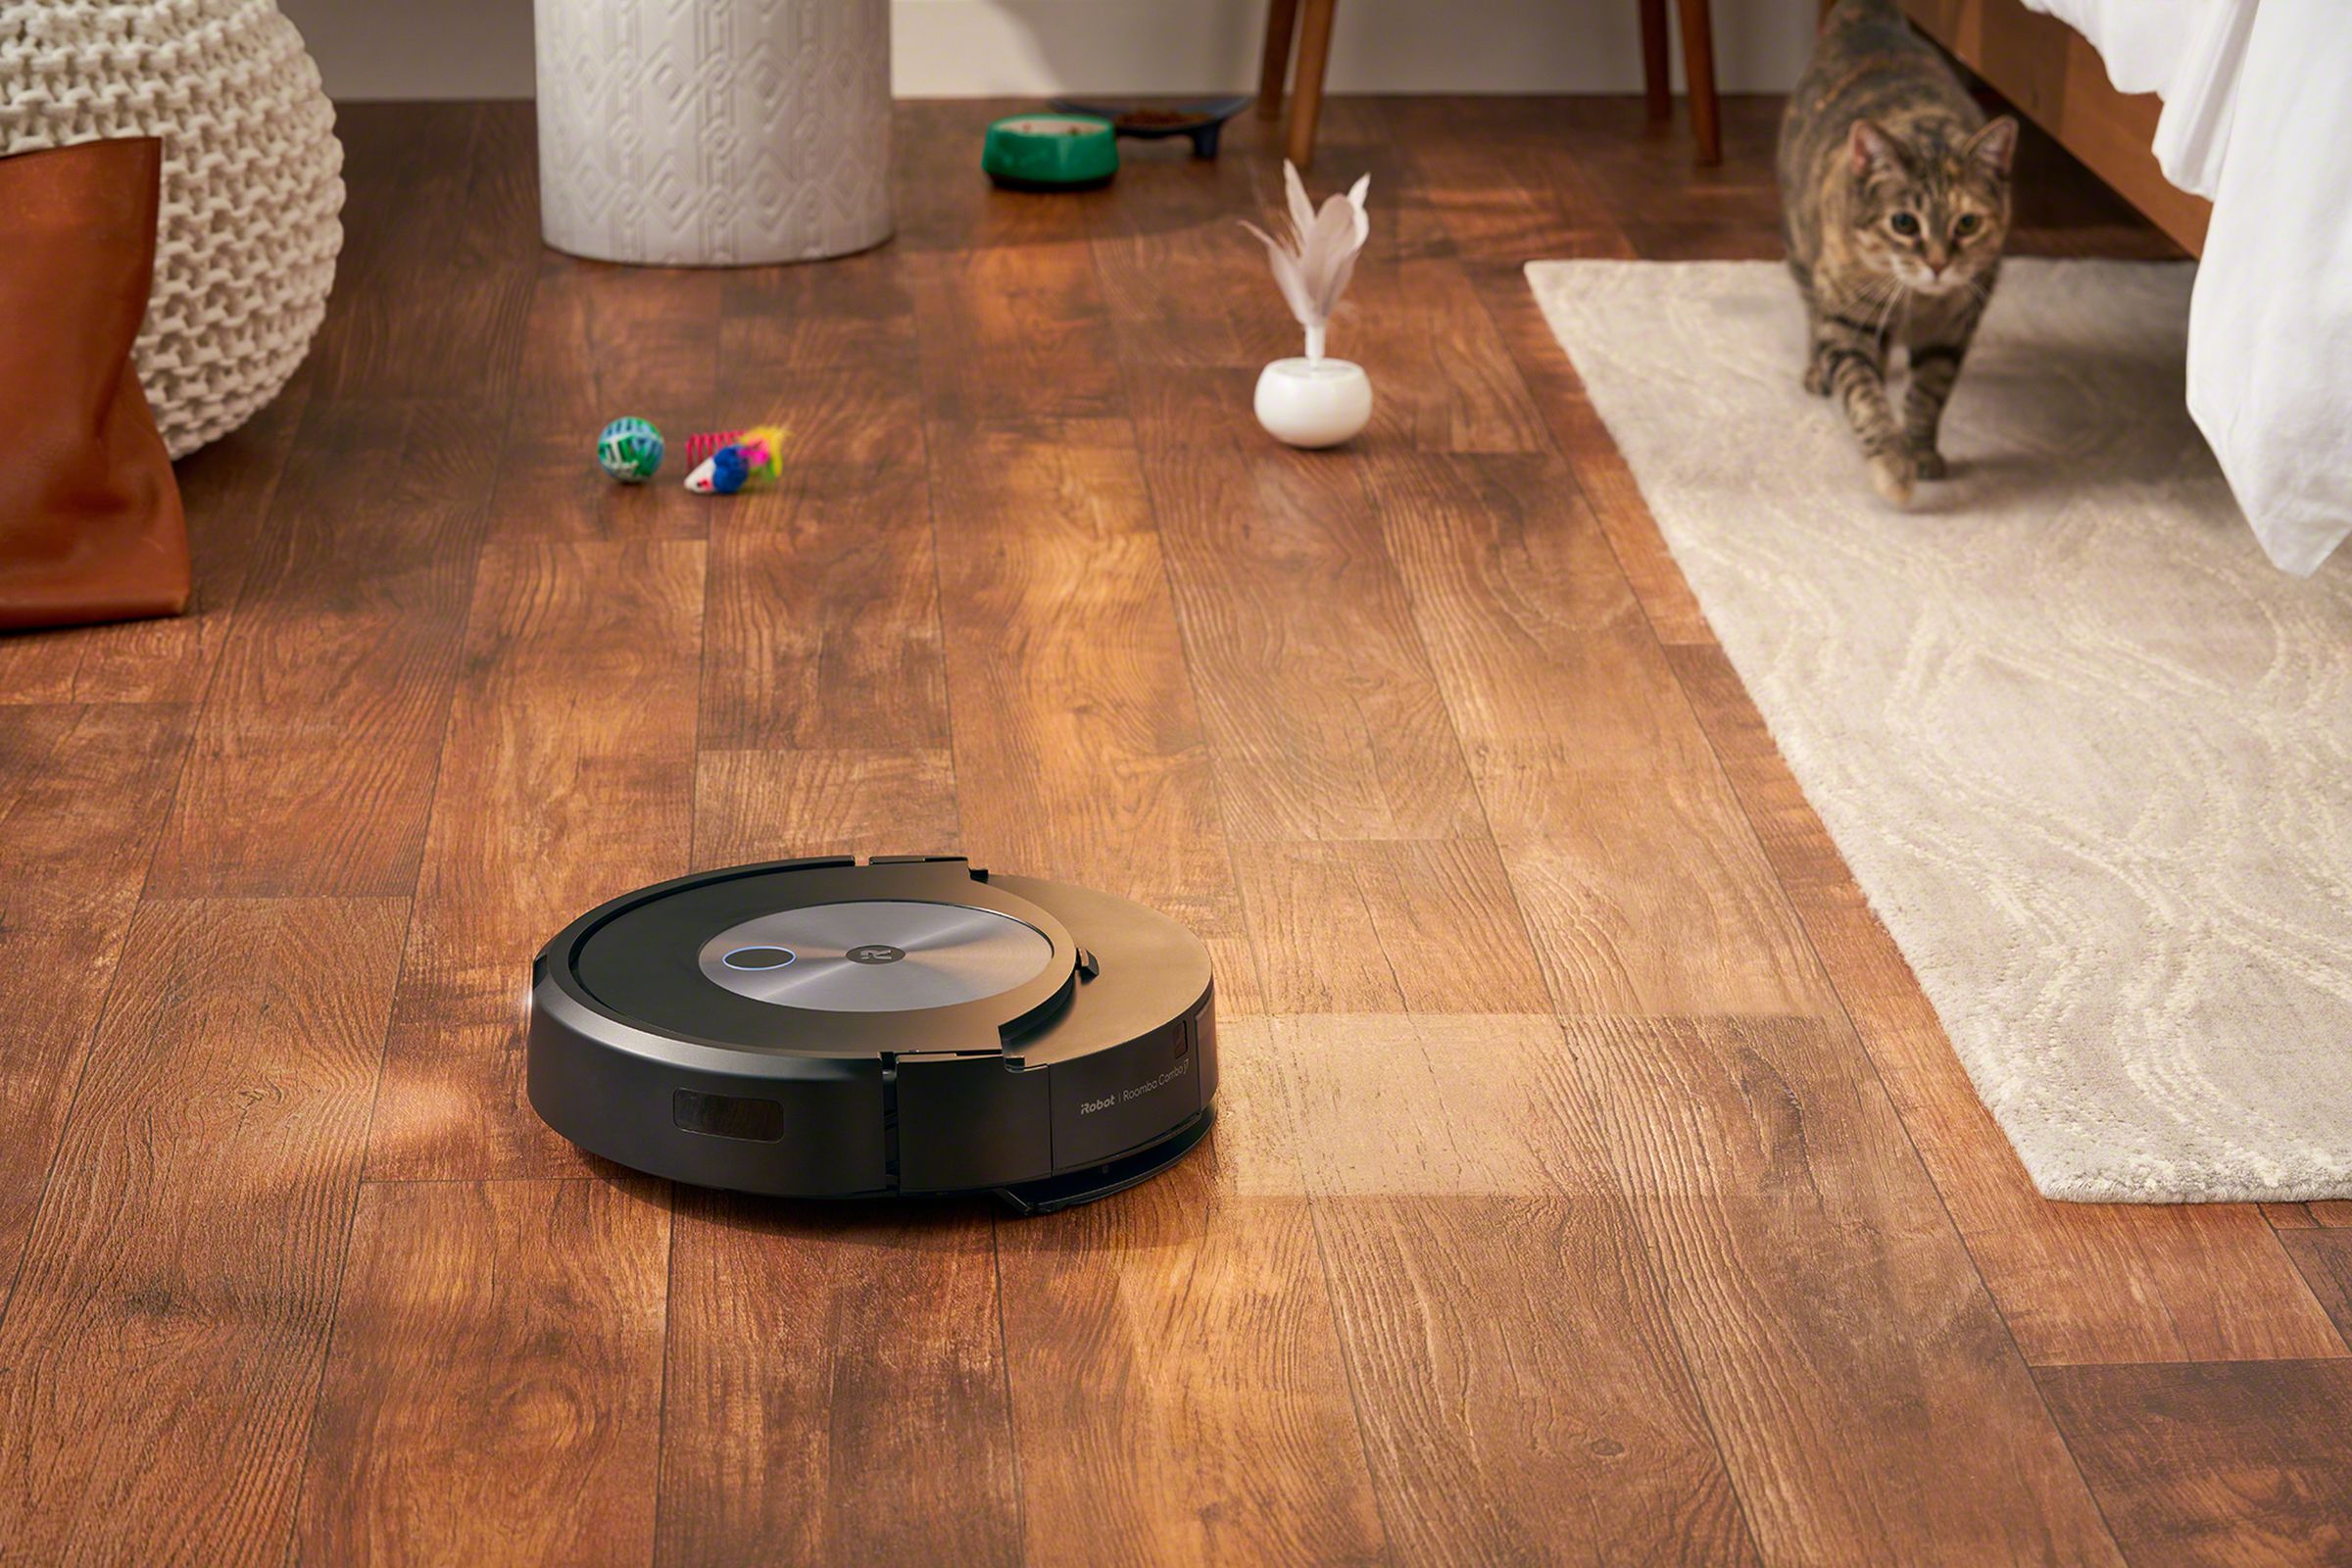 iRobot's new Roomba is a mop and vacuum in one - The Verge